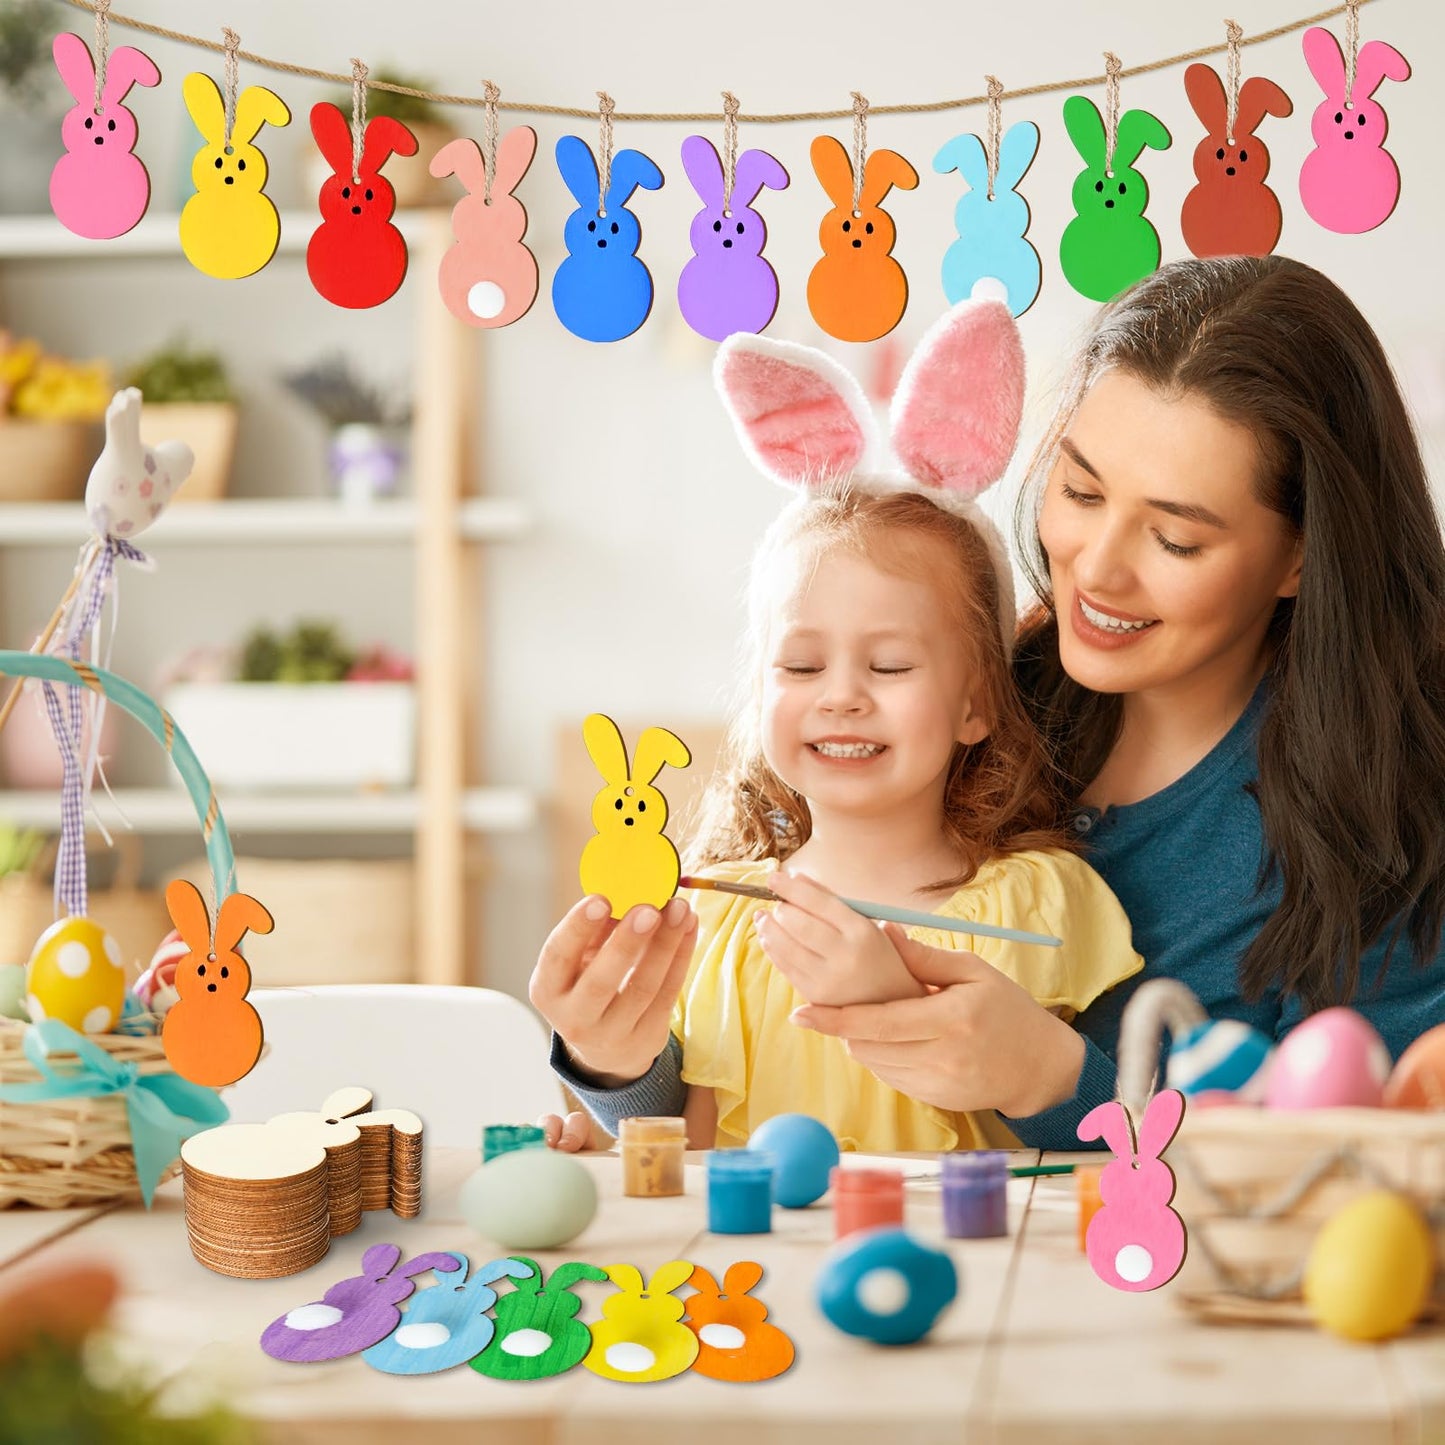 Whaline 30Pcs Easter DIY Crafts Sets Unfinished Wood Bunny Cutouts with Ropes Felt Balls Paints Brushes Palette Glue Points Spring Rabbit Wood